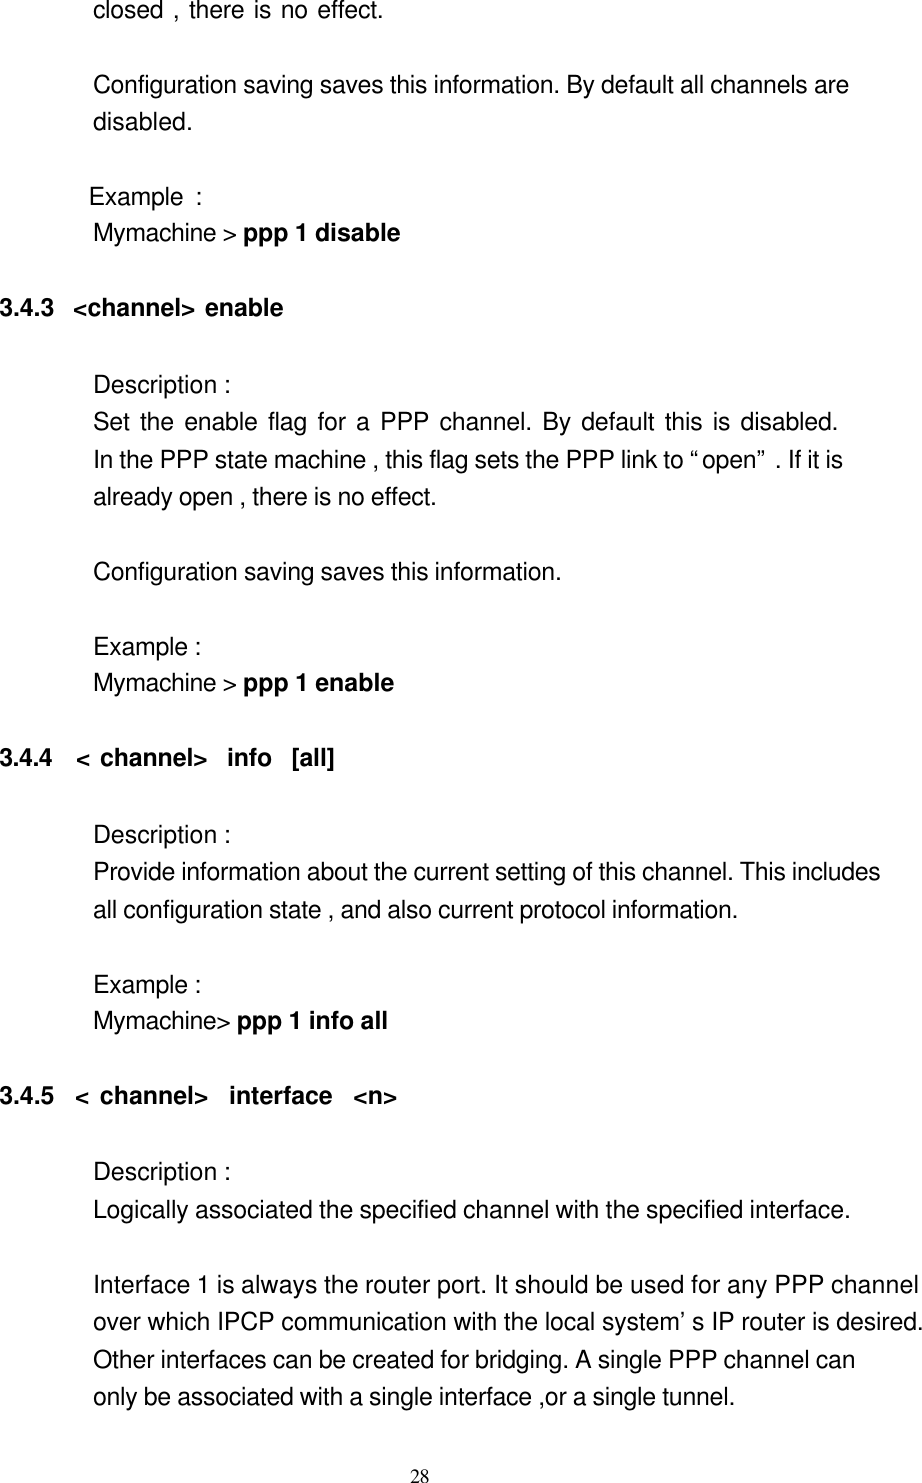  28 closed , there is no effect.                   Configuration saving saves this information. By default all channels are   disabled.                      Example :   Mymachine &gt; ppp 1 disable           3.4.3  &lt;channel&gt; enable  Description :   Set the enable flag for a PPP channel. By default this is disabled.                      In the PPP state machine , this flag sets the PPP link to “open” . If it is   already open , there is no effect.                         Configuration saving saves this information.  Example :   Mymachine &gt; ppp 1 enable       3.4.4  &lt; channel&gt;  info  [all]          Description :   Provide information about the current setting of this channel. This includes   all configuration state , and also current protocol information.              Example :   Mymachine&gt; ppp 1 info all  3.4.5  &lt; channel&gt;  interface  &lt;n&gt;  Description :   Logically associated the specified channel with the specified interface.  Interface 1 is always the router port. It should be used for any PPP channel over which IPCP communication with the local system’s IP router is desired. Other interfaces can be created for bridging. A single PPP channel can only be associated with a single interface ,or a single tunnel.   